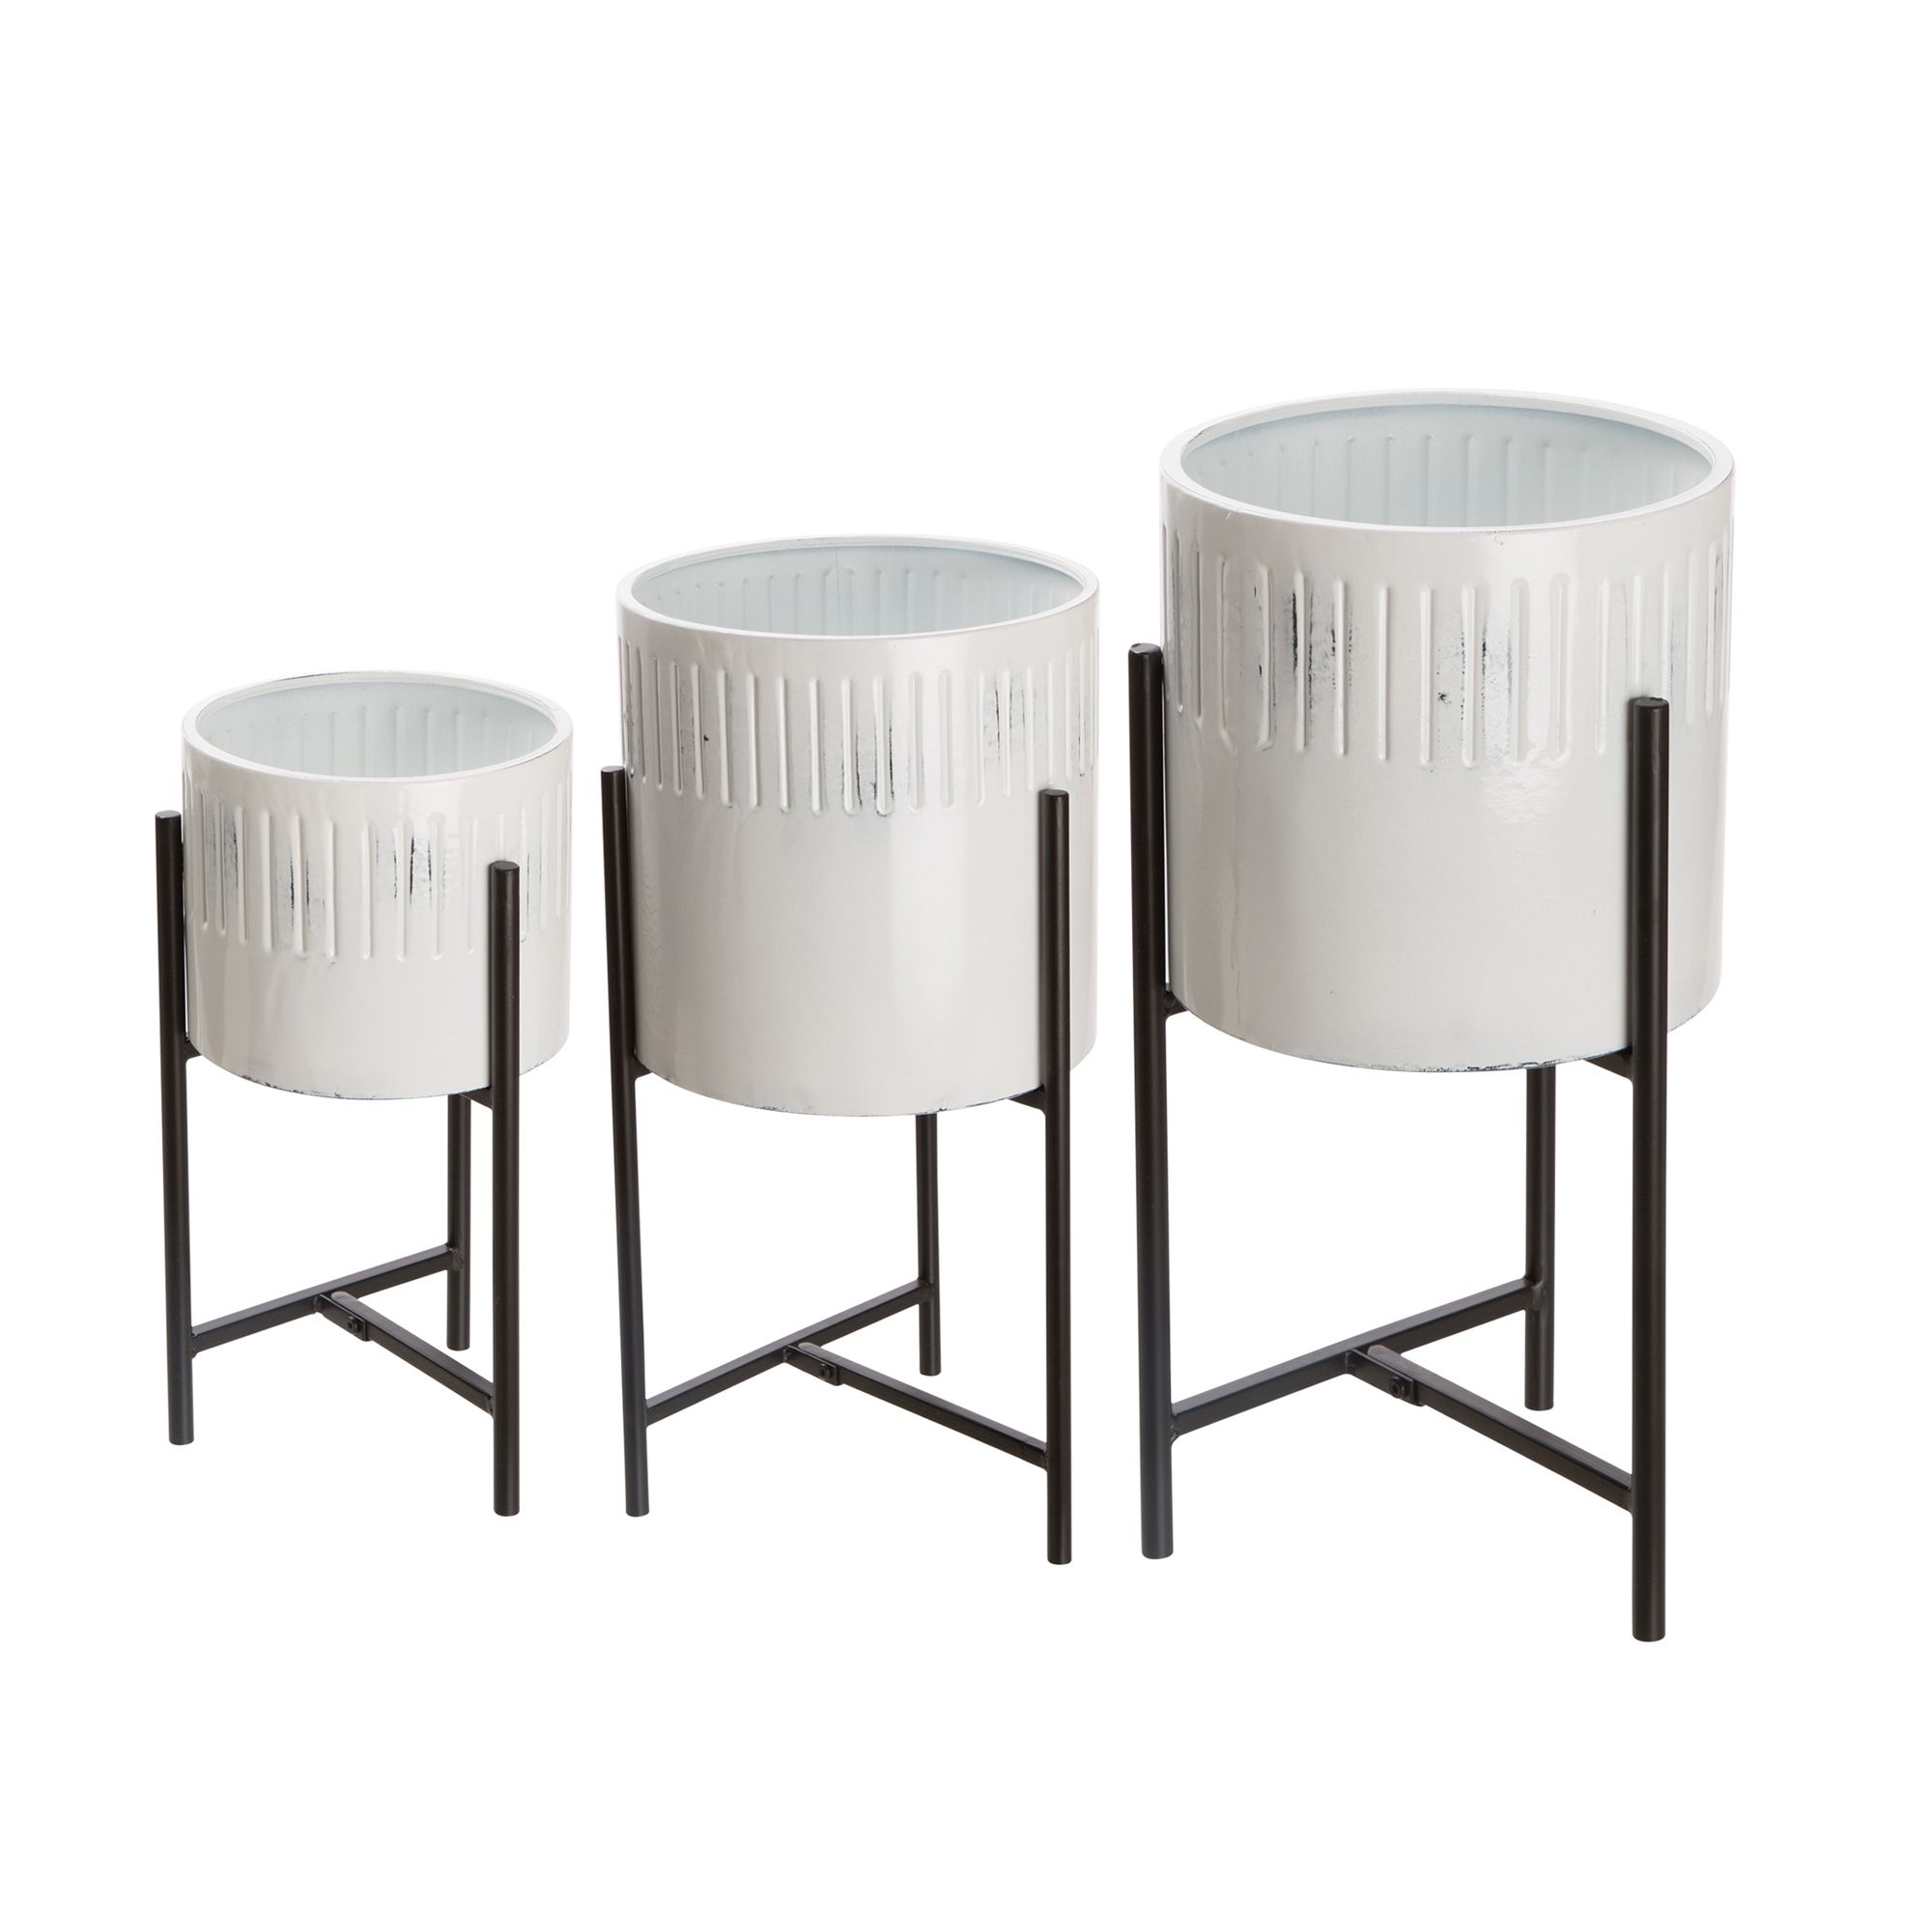 Most Recent Set Of 3 Plant Stands Intended For Glitzhome Washed White Metal Plant Stands,set Of 3 – Walmart (View 9 of 15)